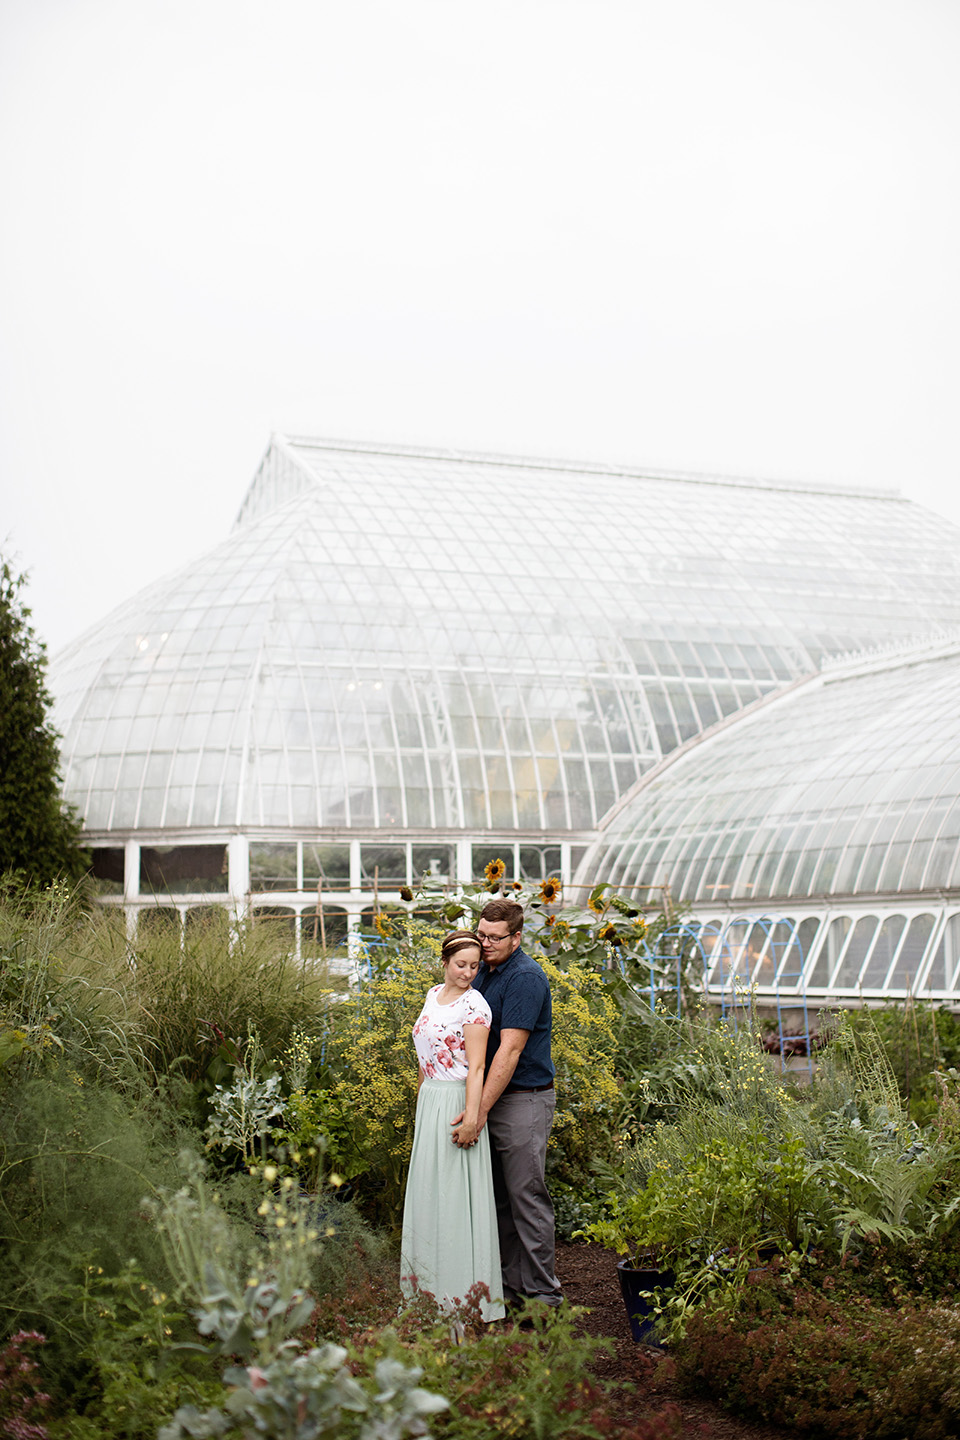 PHIPPS CONSERVATORY ENGAGEMENT PHOTO SESSION-PITTSBURGH, PA-LORENE+DUANE- 14